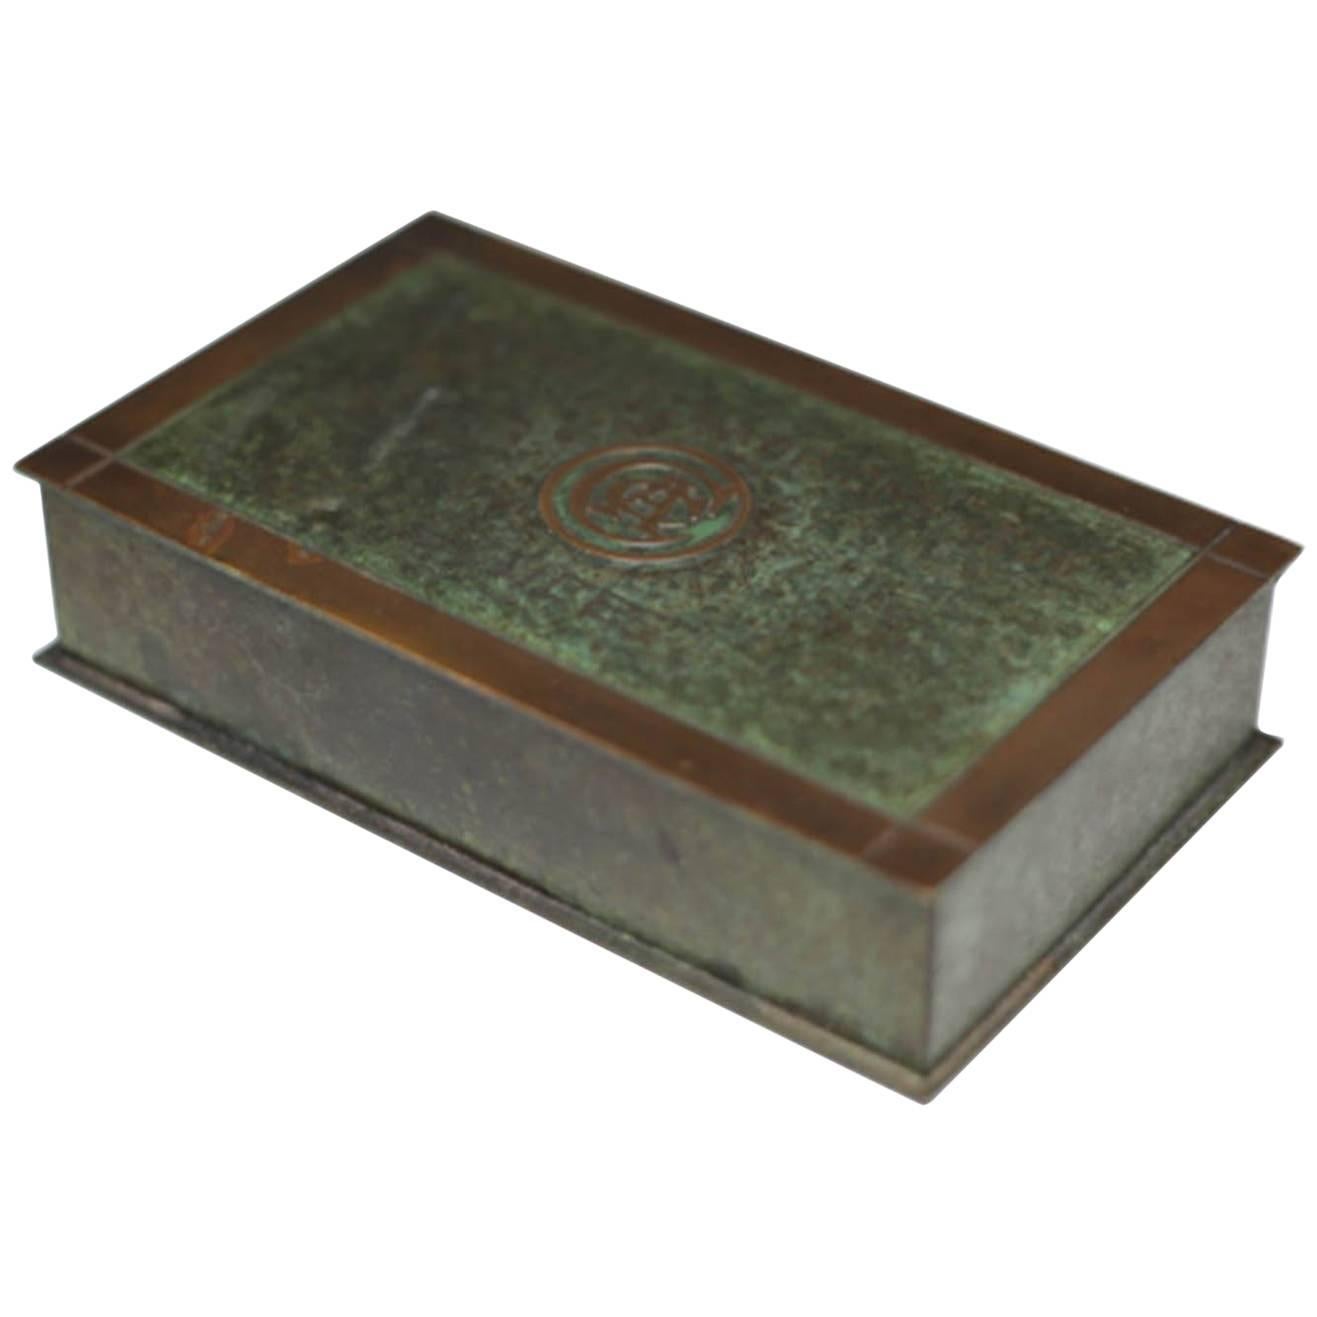 Antique Art Deco Patinated Copper and Brass Trophy Box, circa 1936